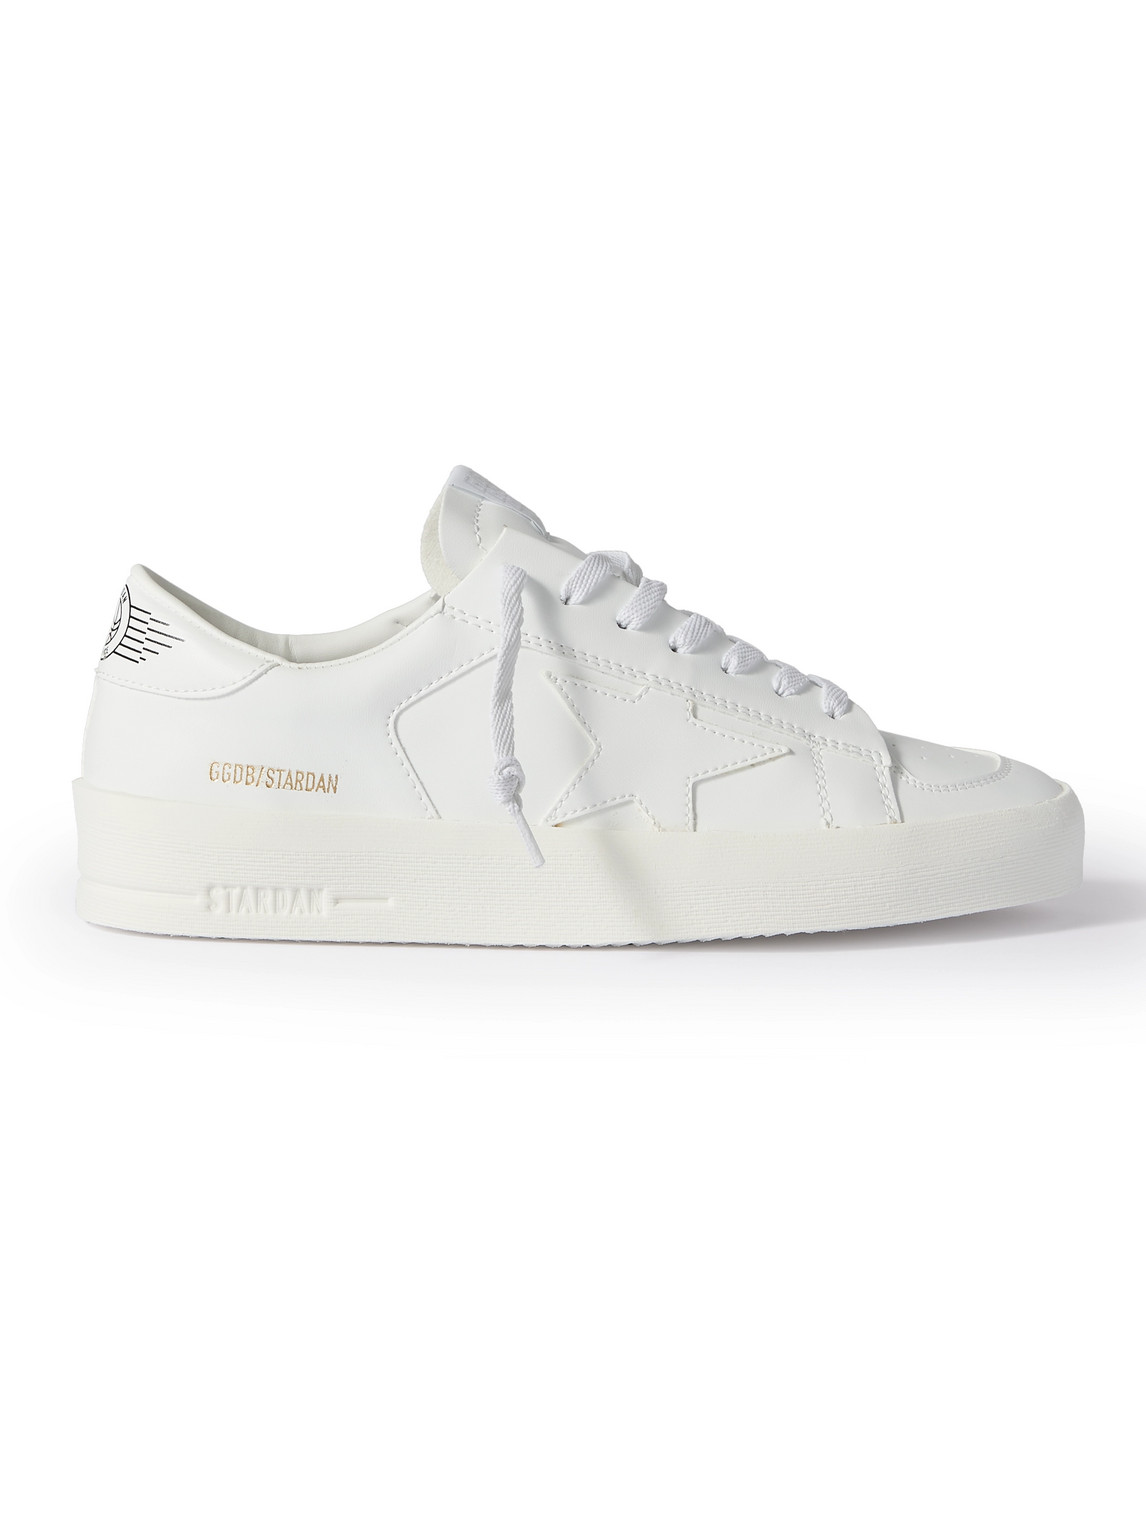 Shop Golden Goose Stardan Faux Leather Sneakers In White